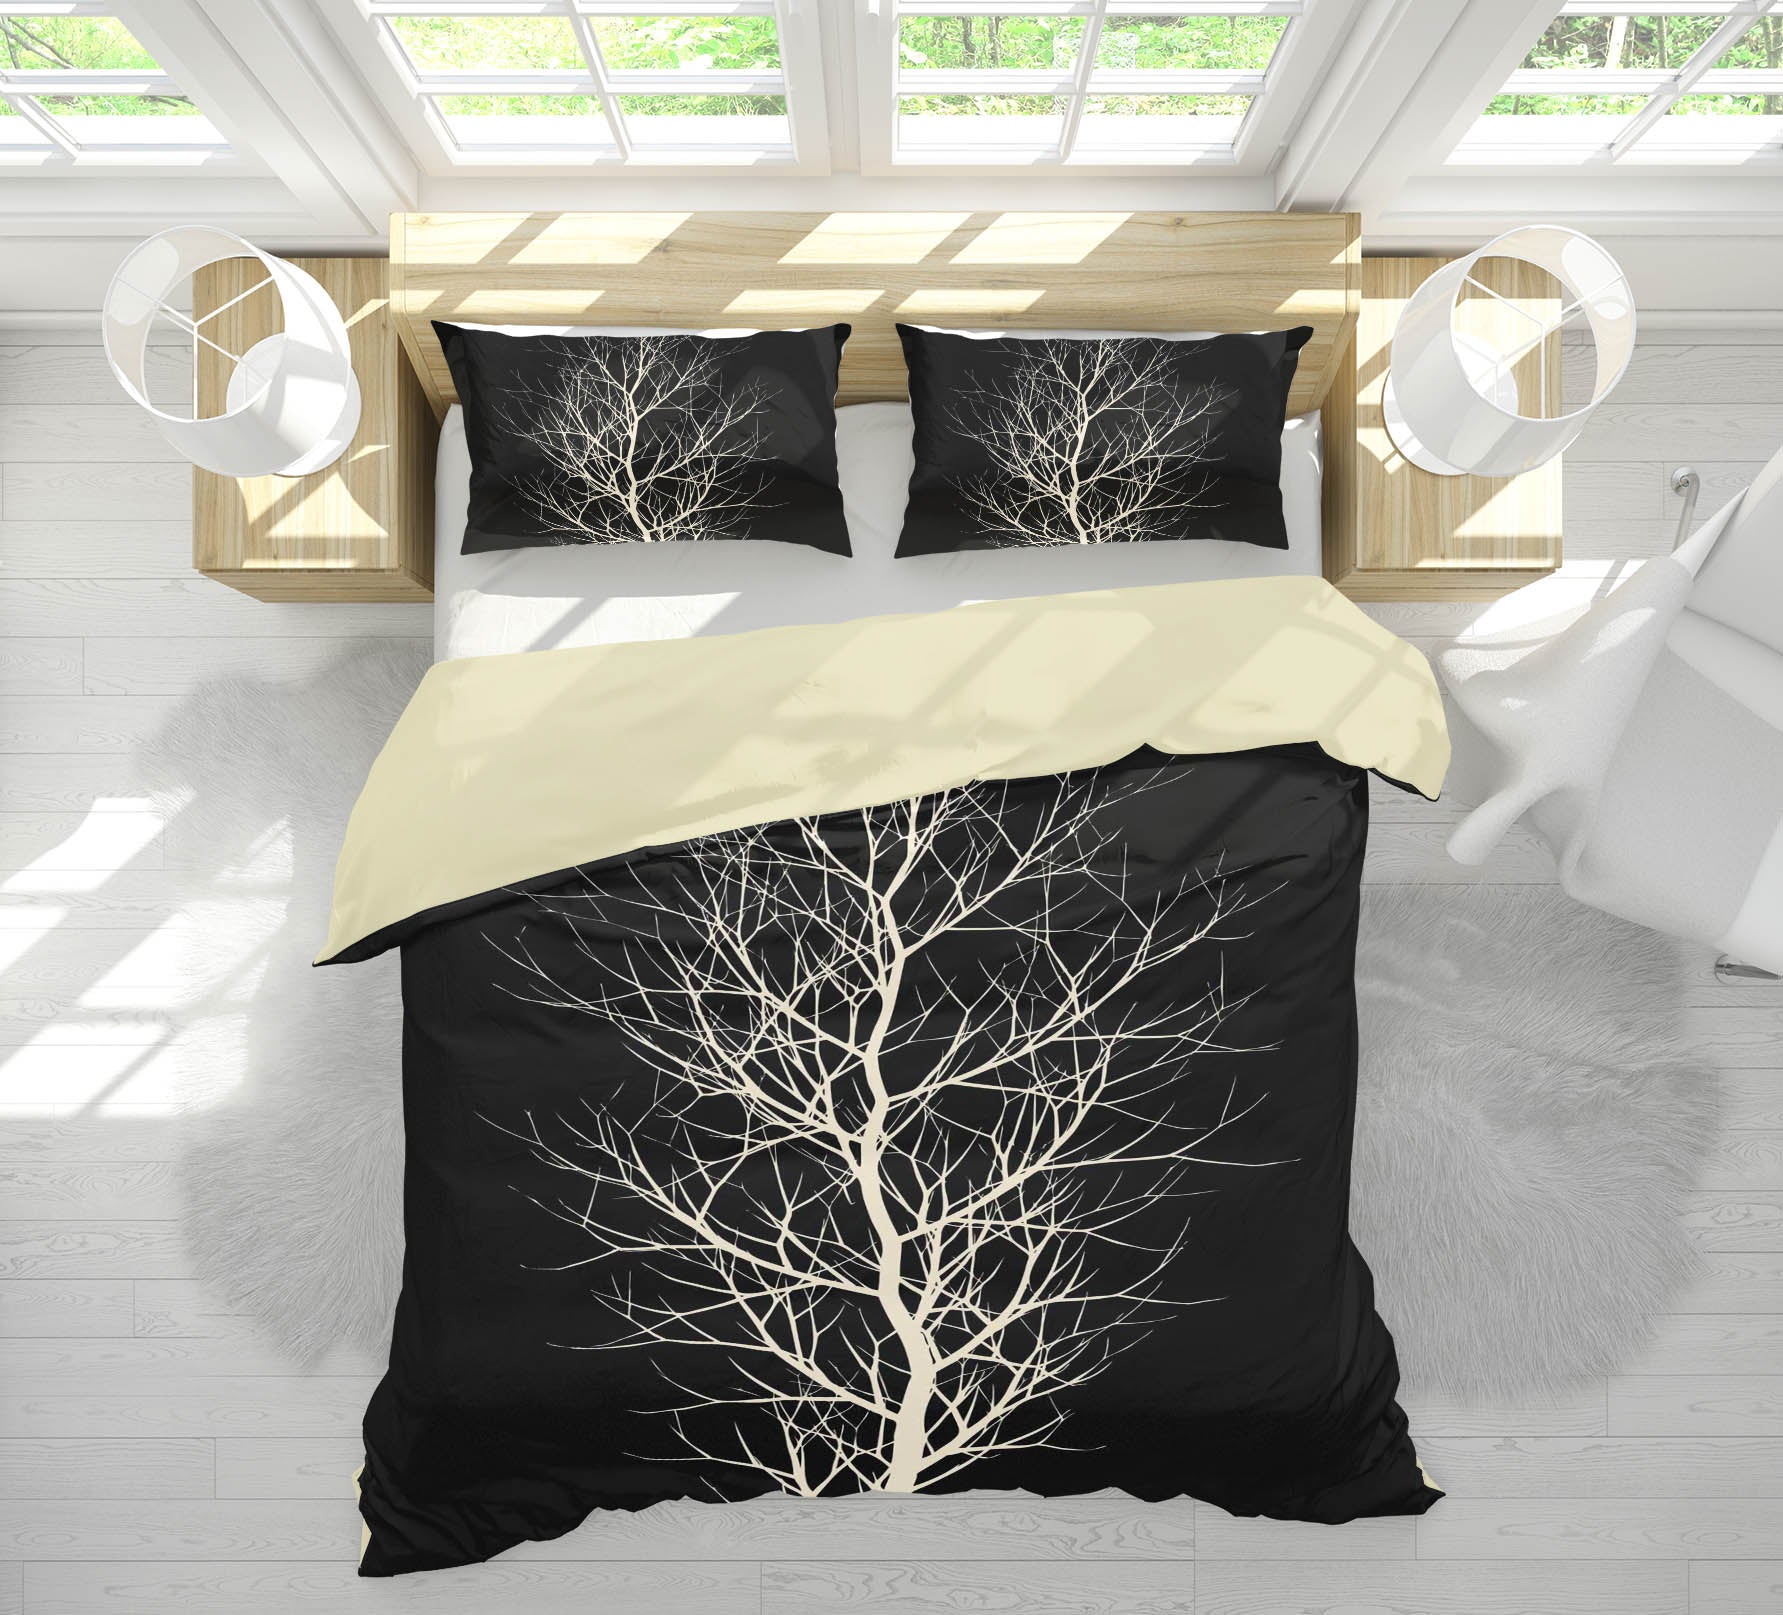 3D The White Tree 2122 Boris Draschoff Bedding Bed Pillowcases Quilt